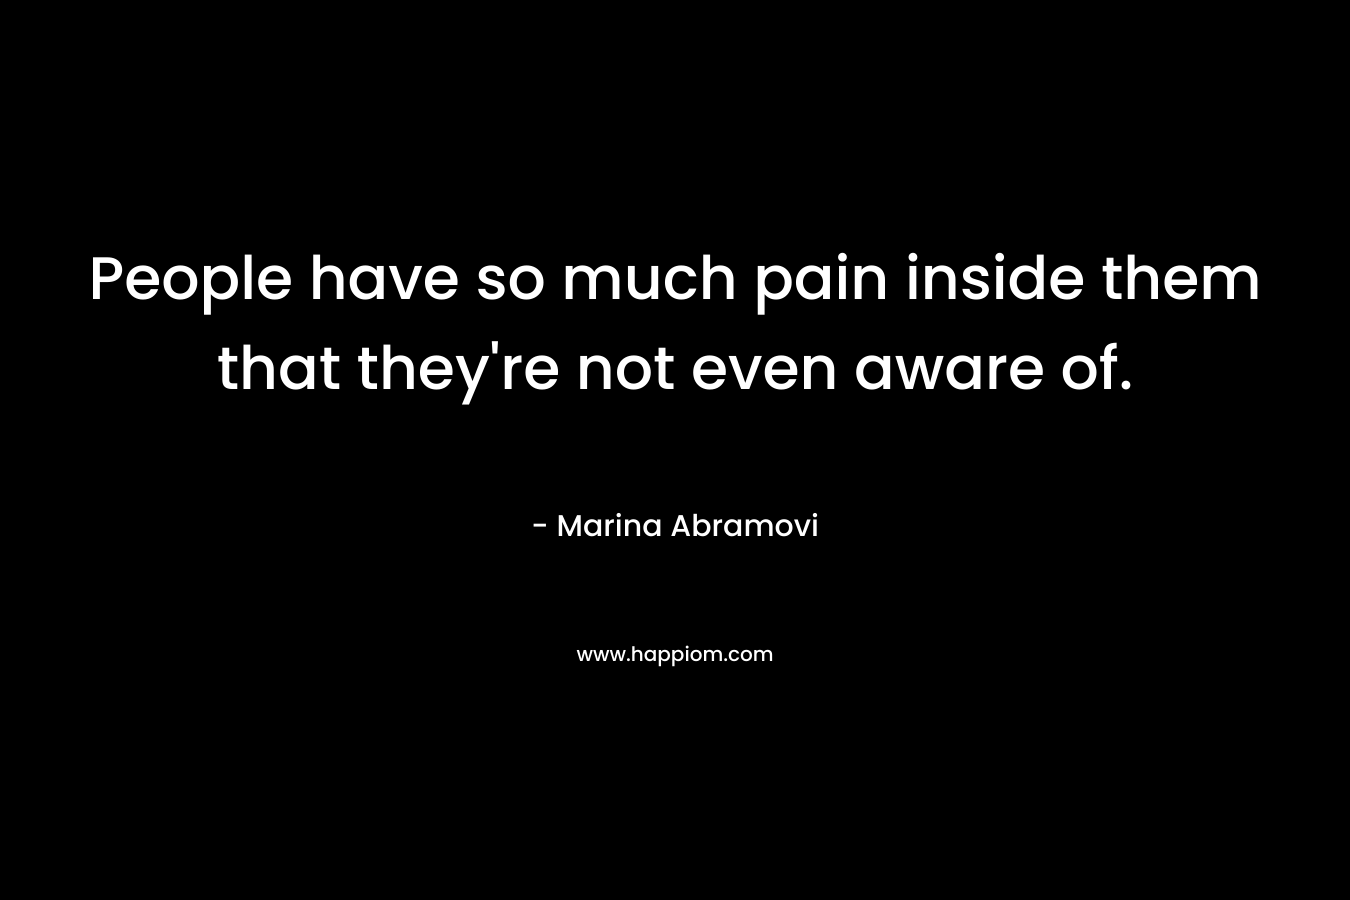 People have so much pain inside them that they’re not even aware of. – Marina Abramovi